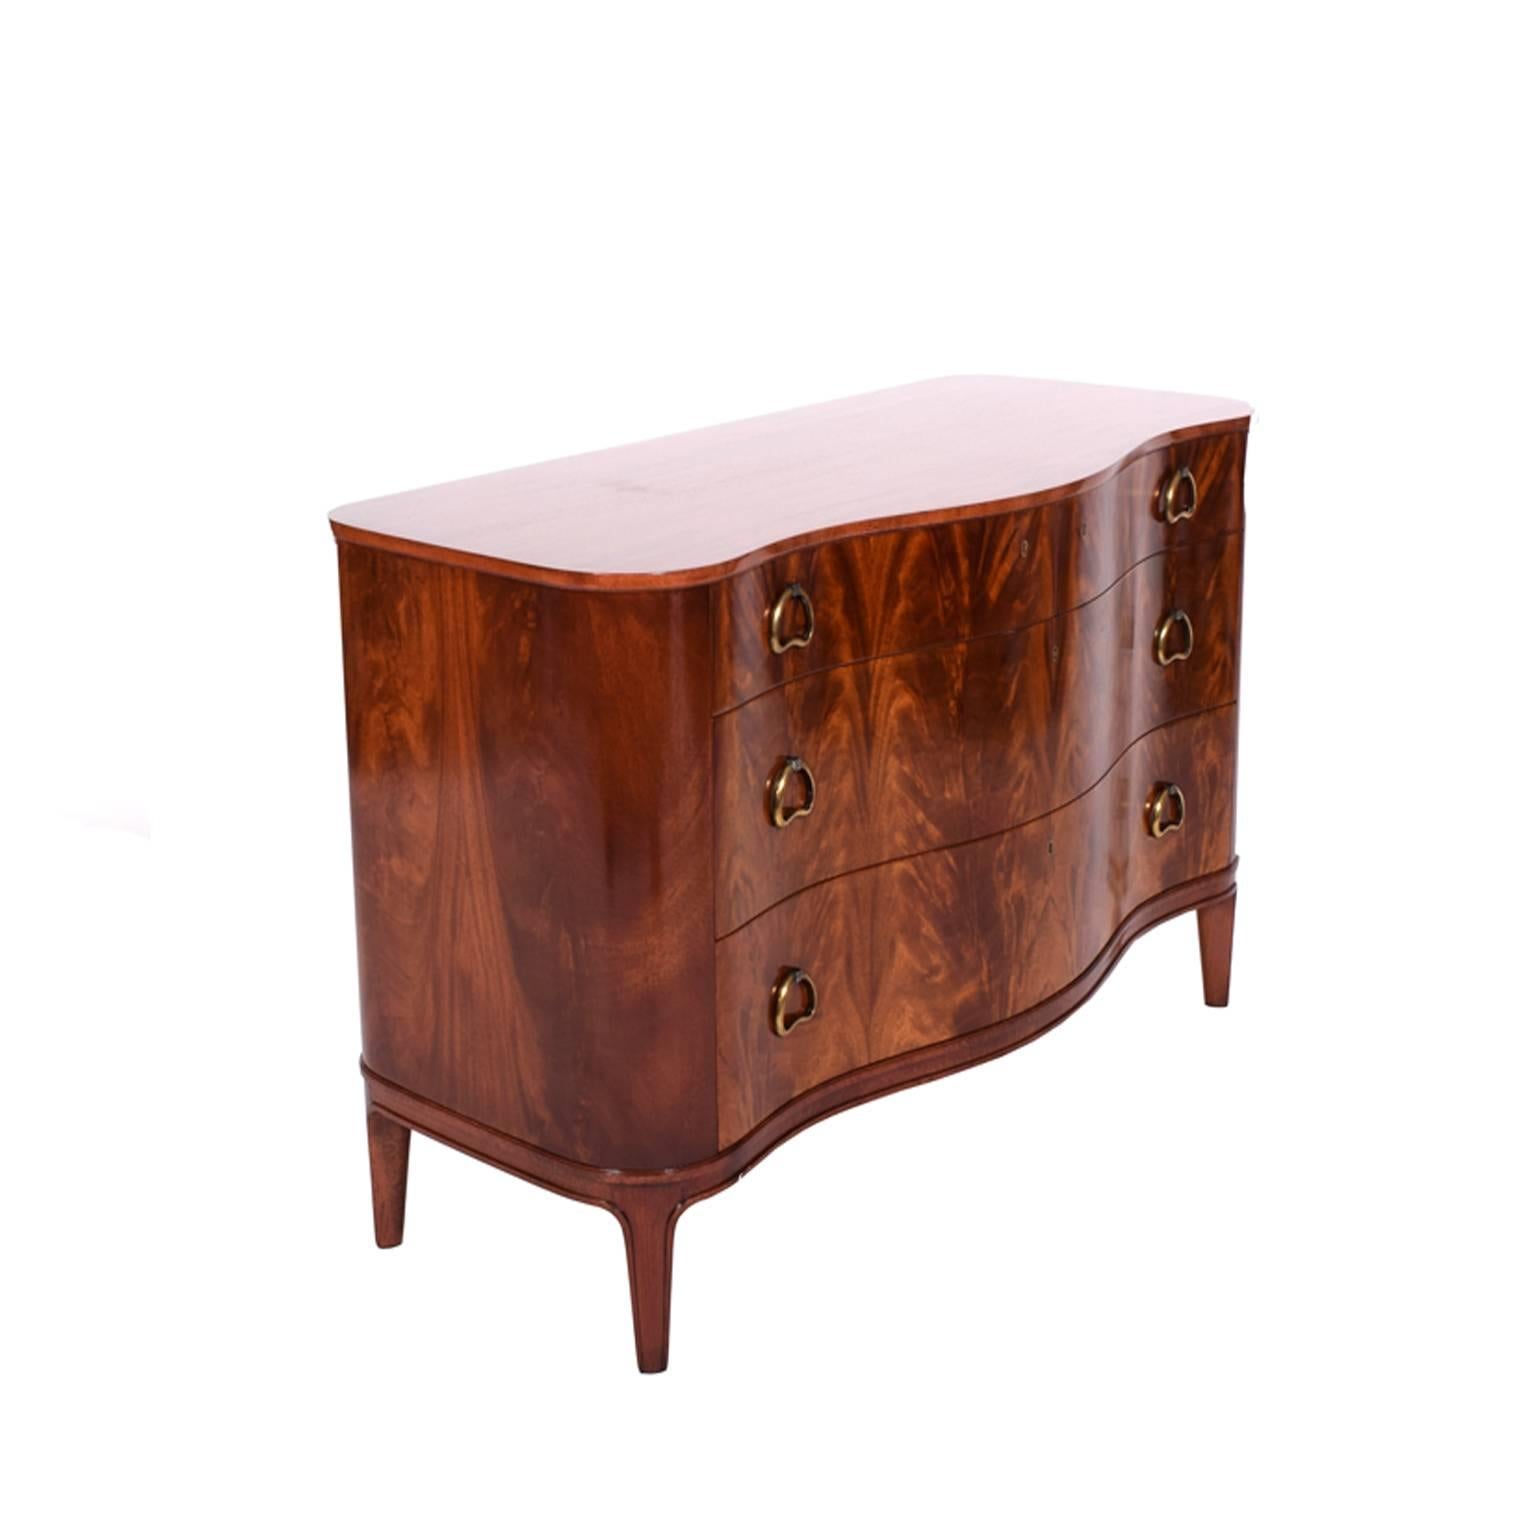 Flame mahogany free-form chest of drawers designed by Axel Larsson for Bodafors, 1940s; retains label in drawer.